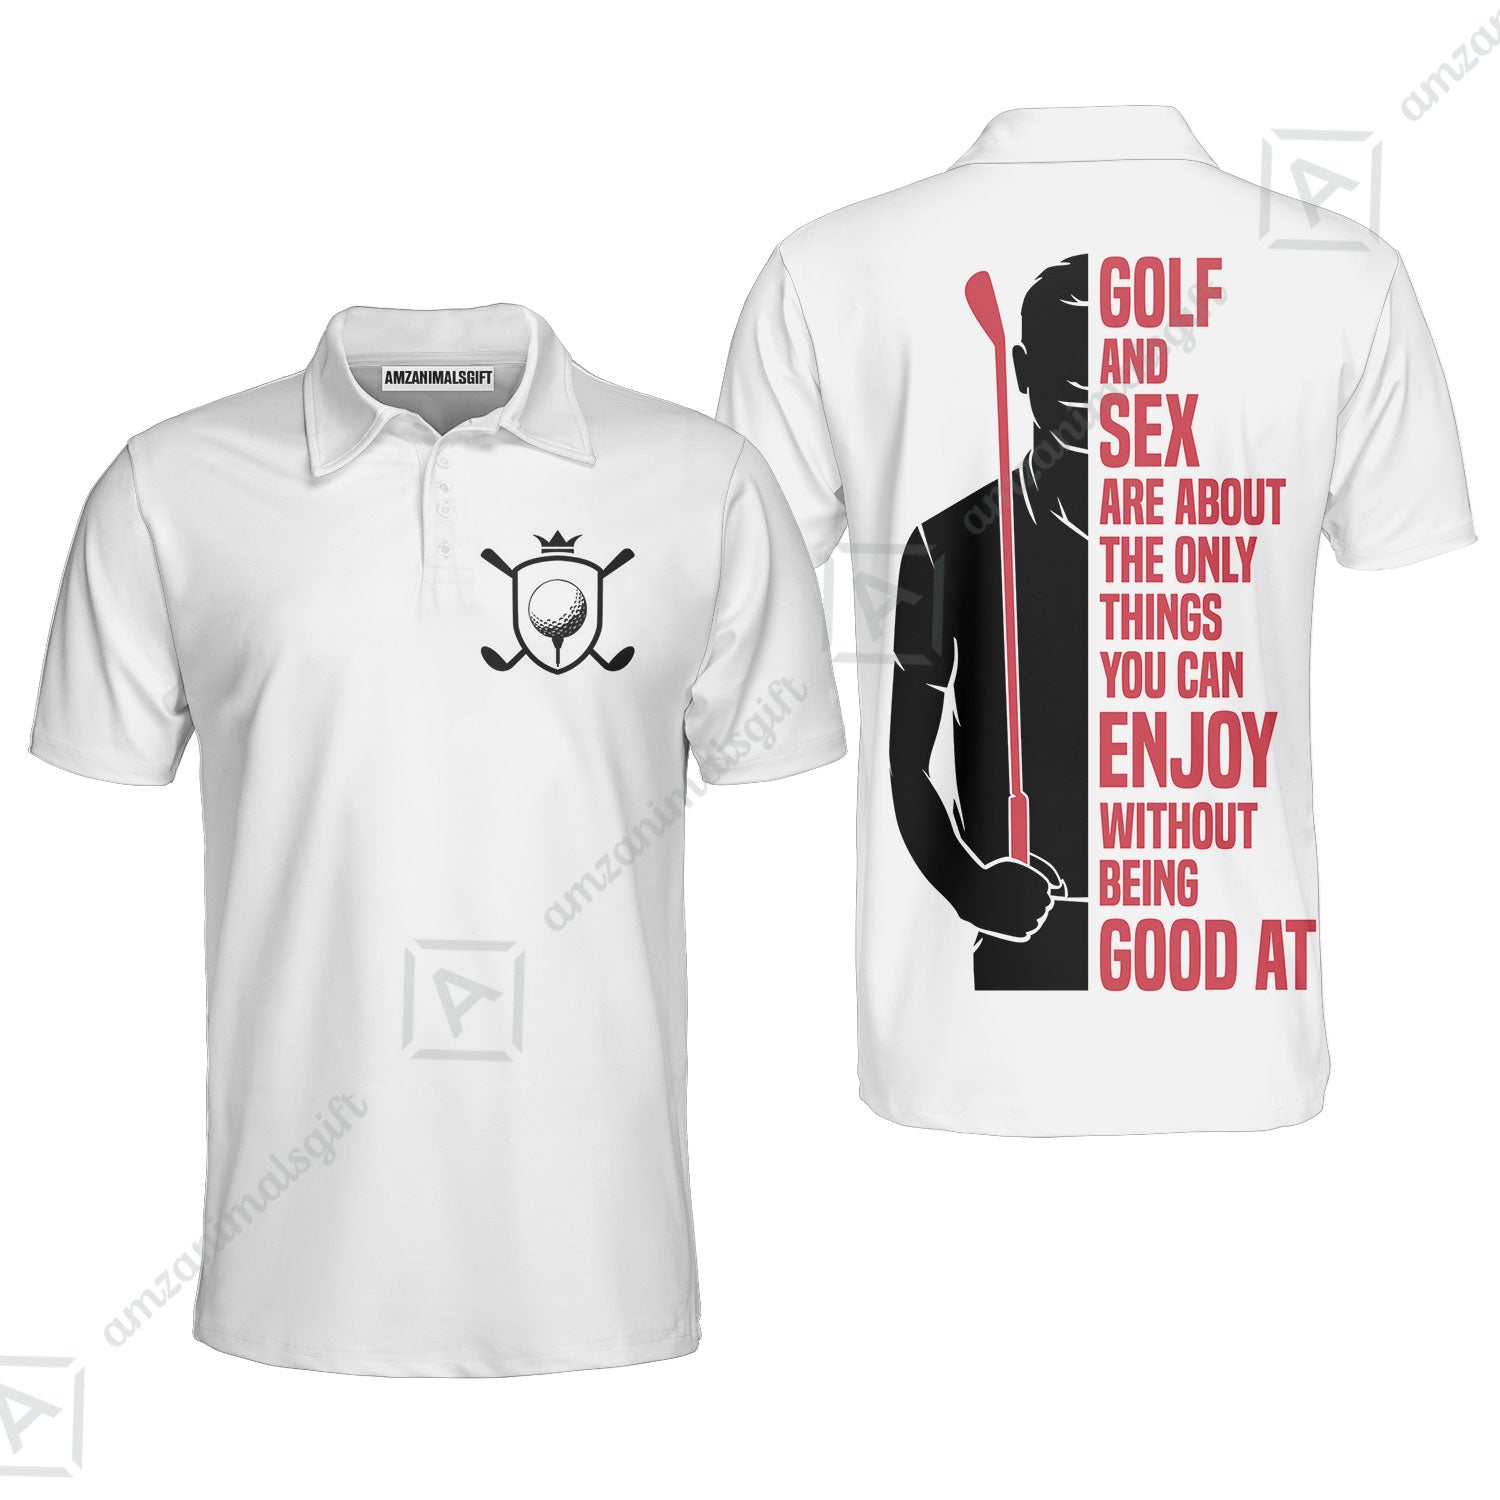 Golf Polo Shirt - Golf And Sex Are About The Only Things You Can Enjoy Without Being Good At Polo Shirt,True Golf Polo Shirt